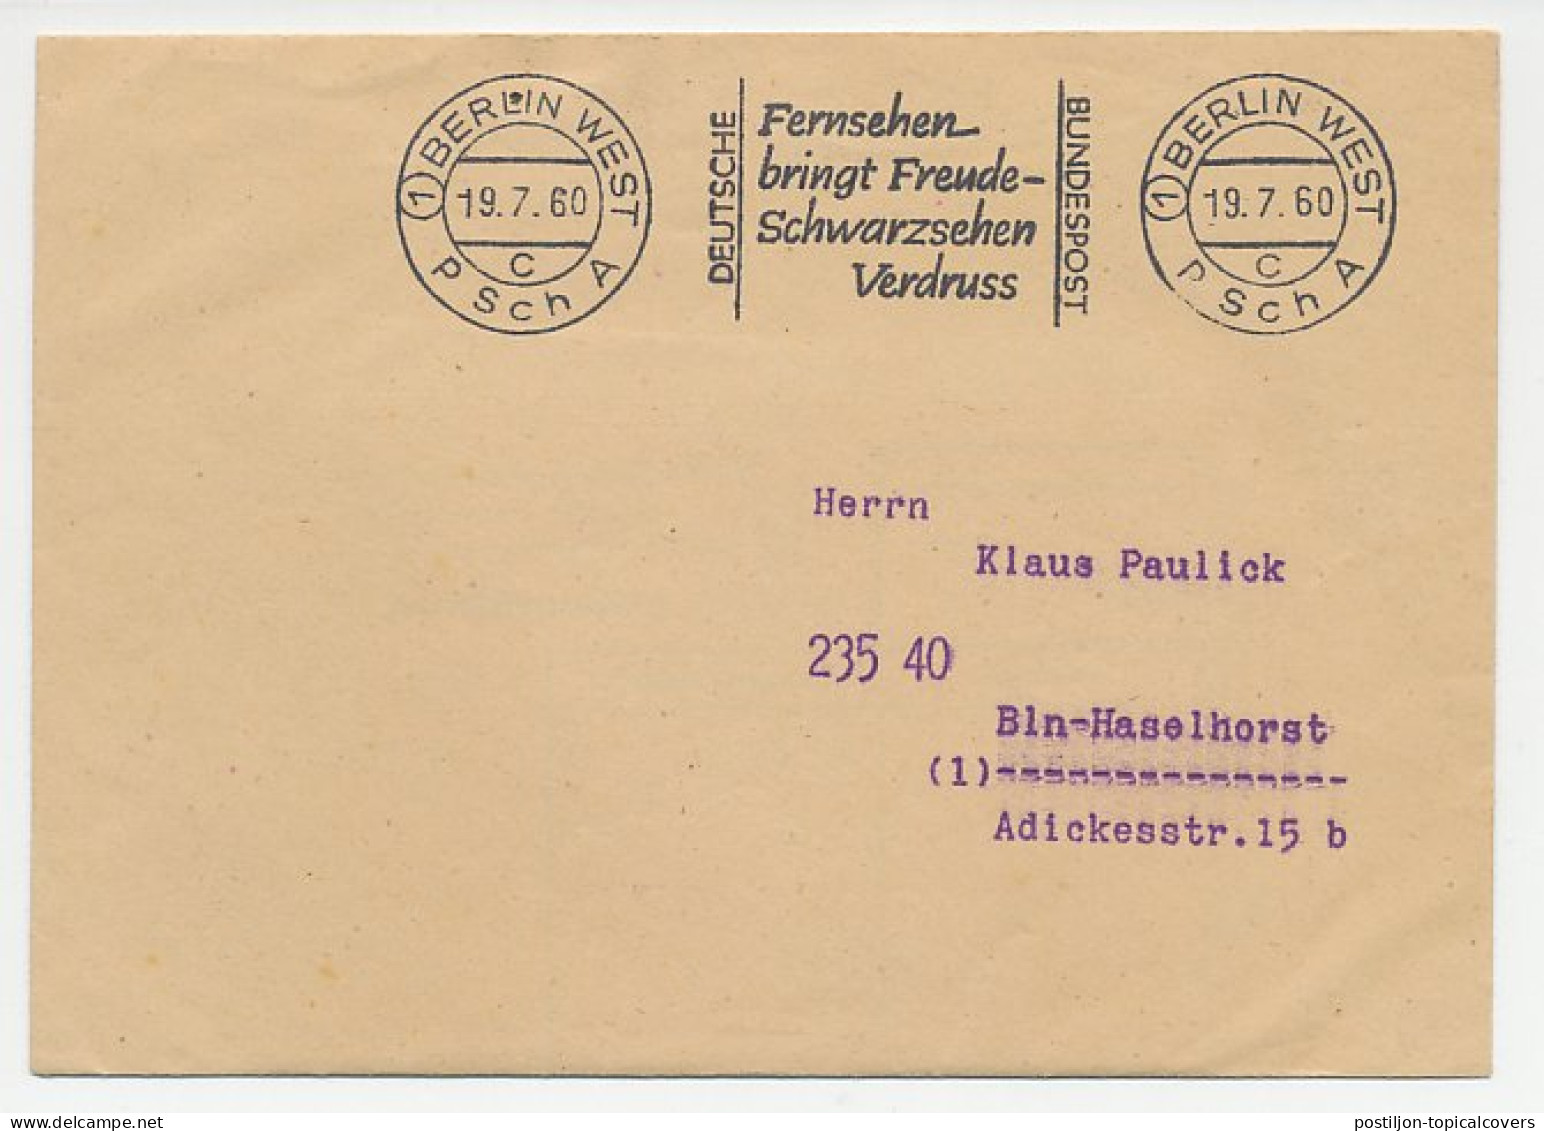 Cover / Postmark Germany 1960 Television - Illegal Watch - Unclassified